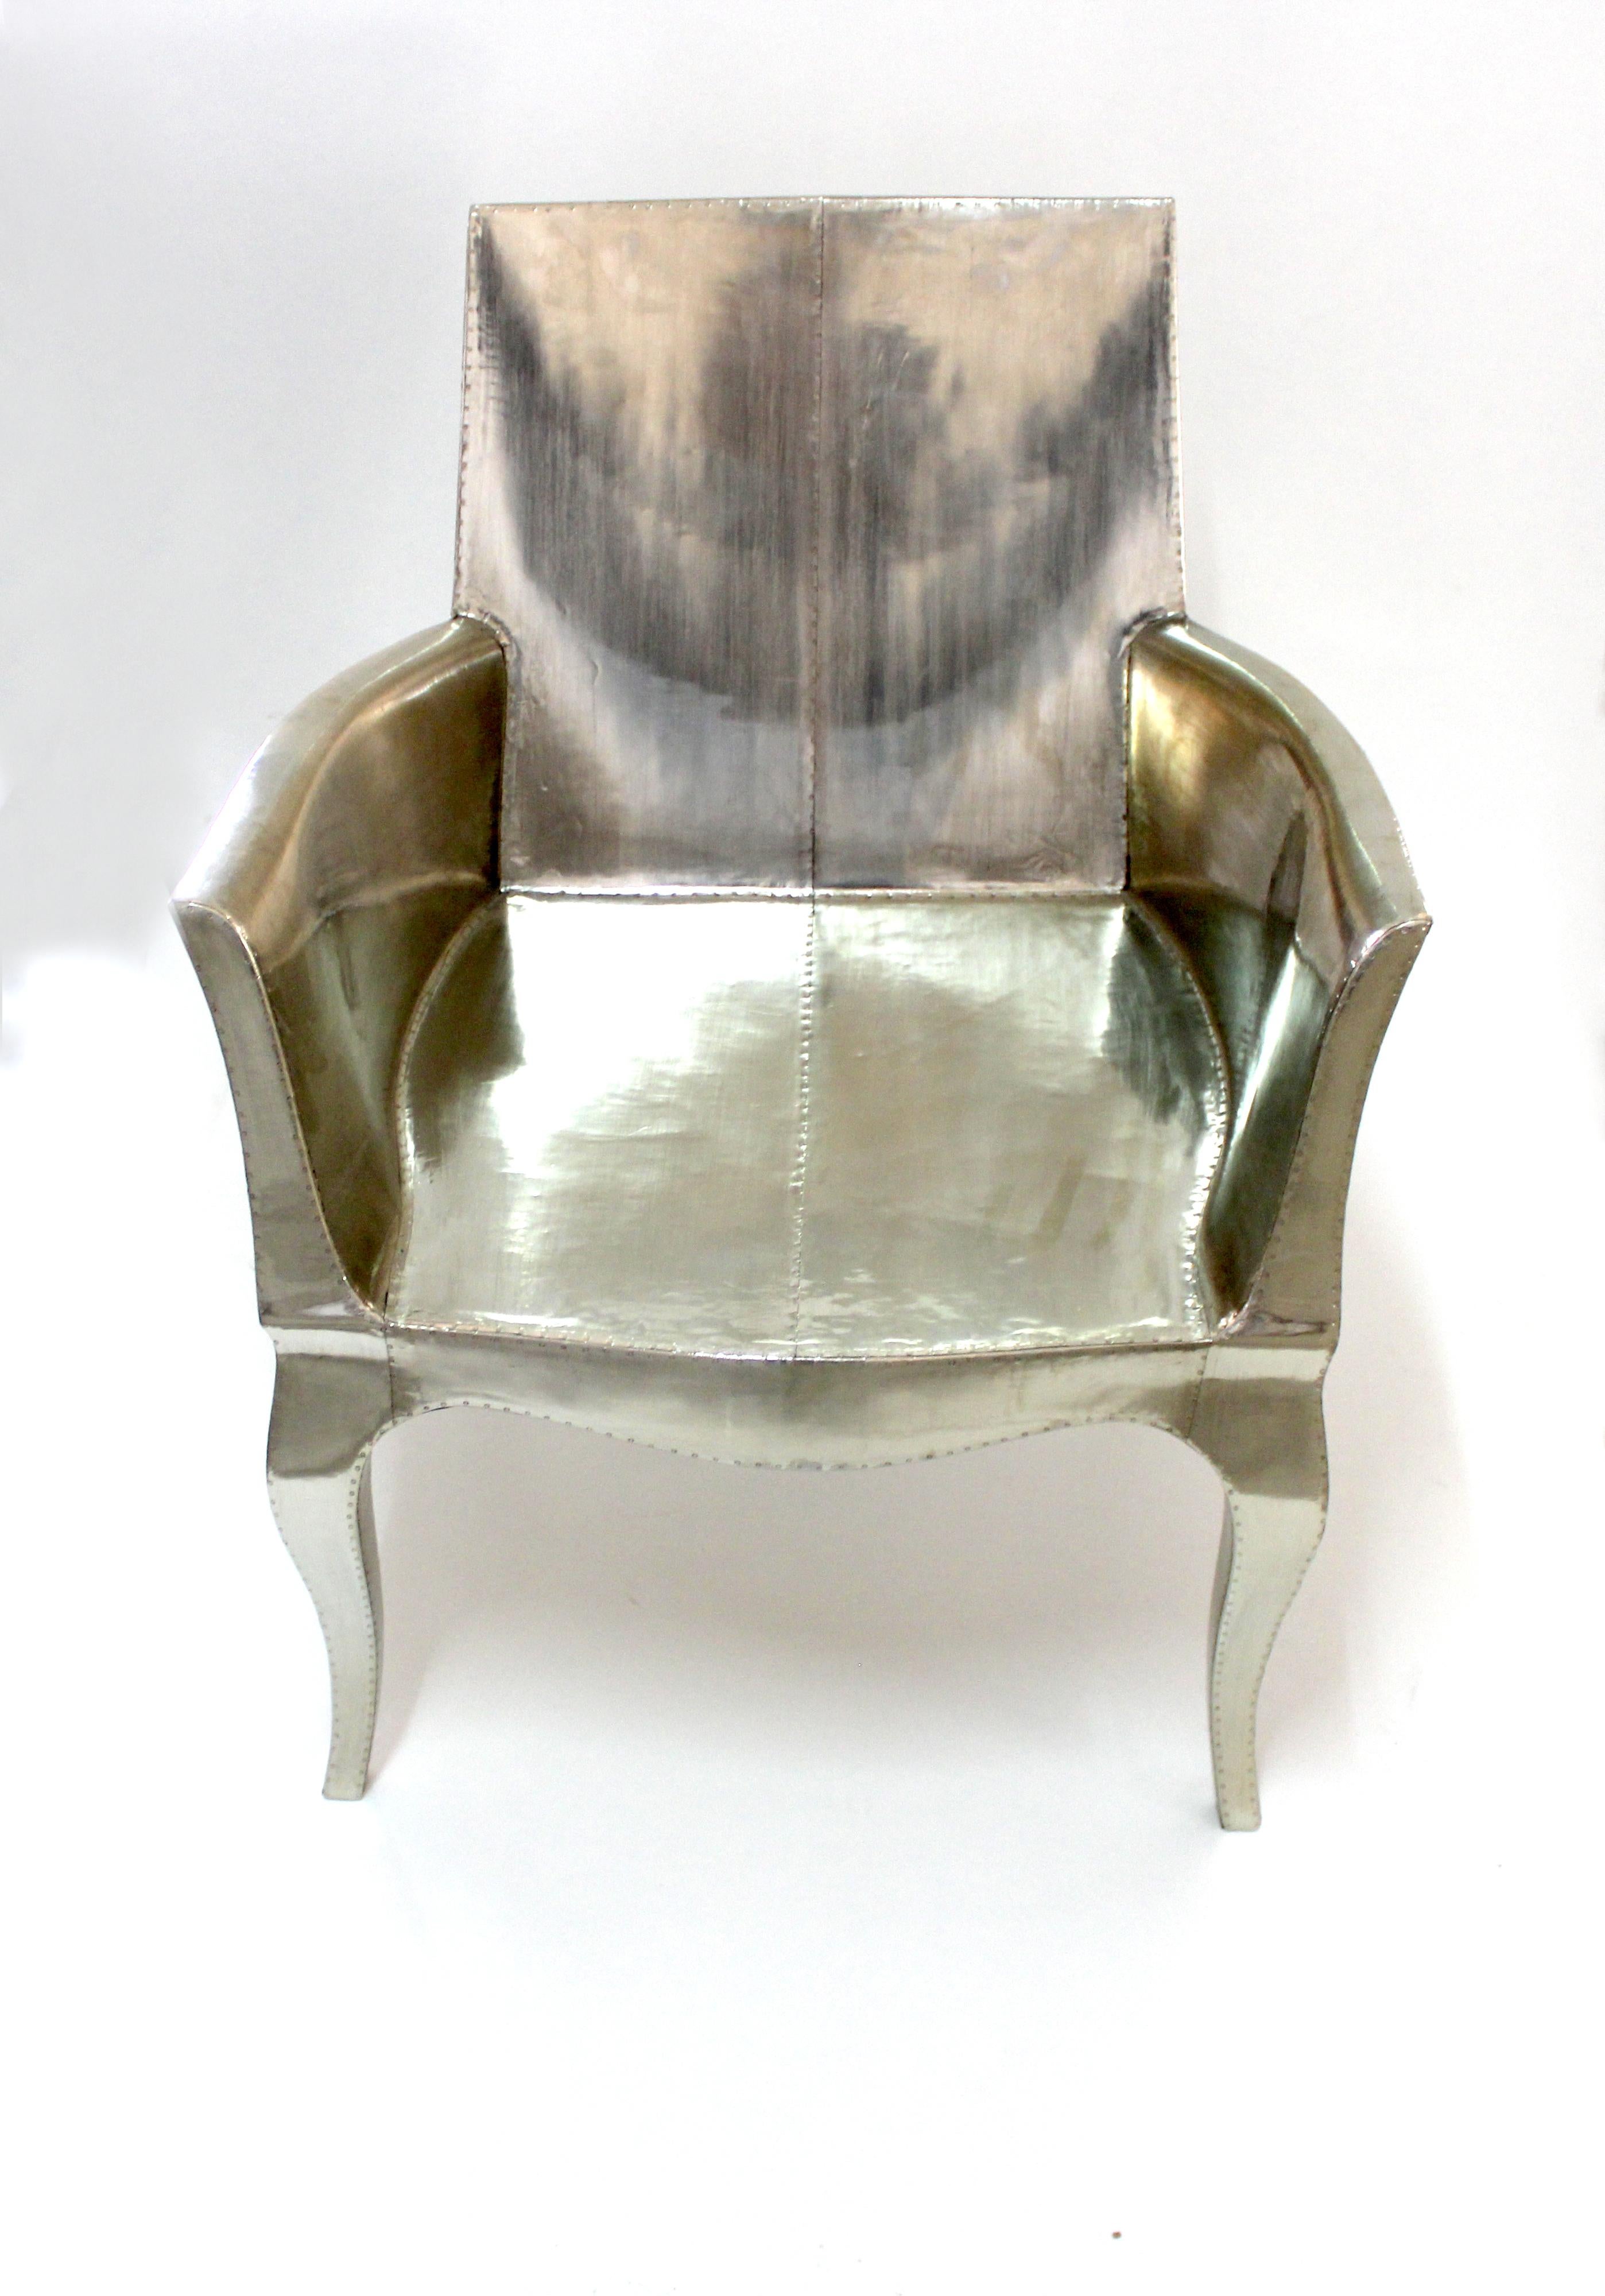 Art Deco Chair Styles in Smooth Antique White Bronze by Paul Mathieu  For Sale 7